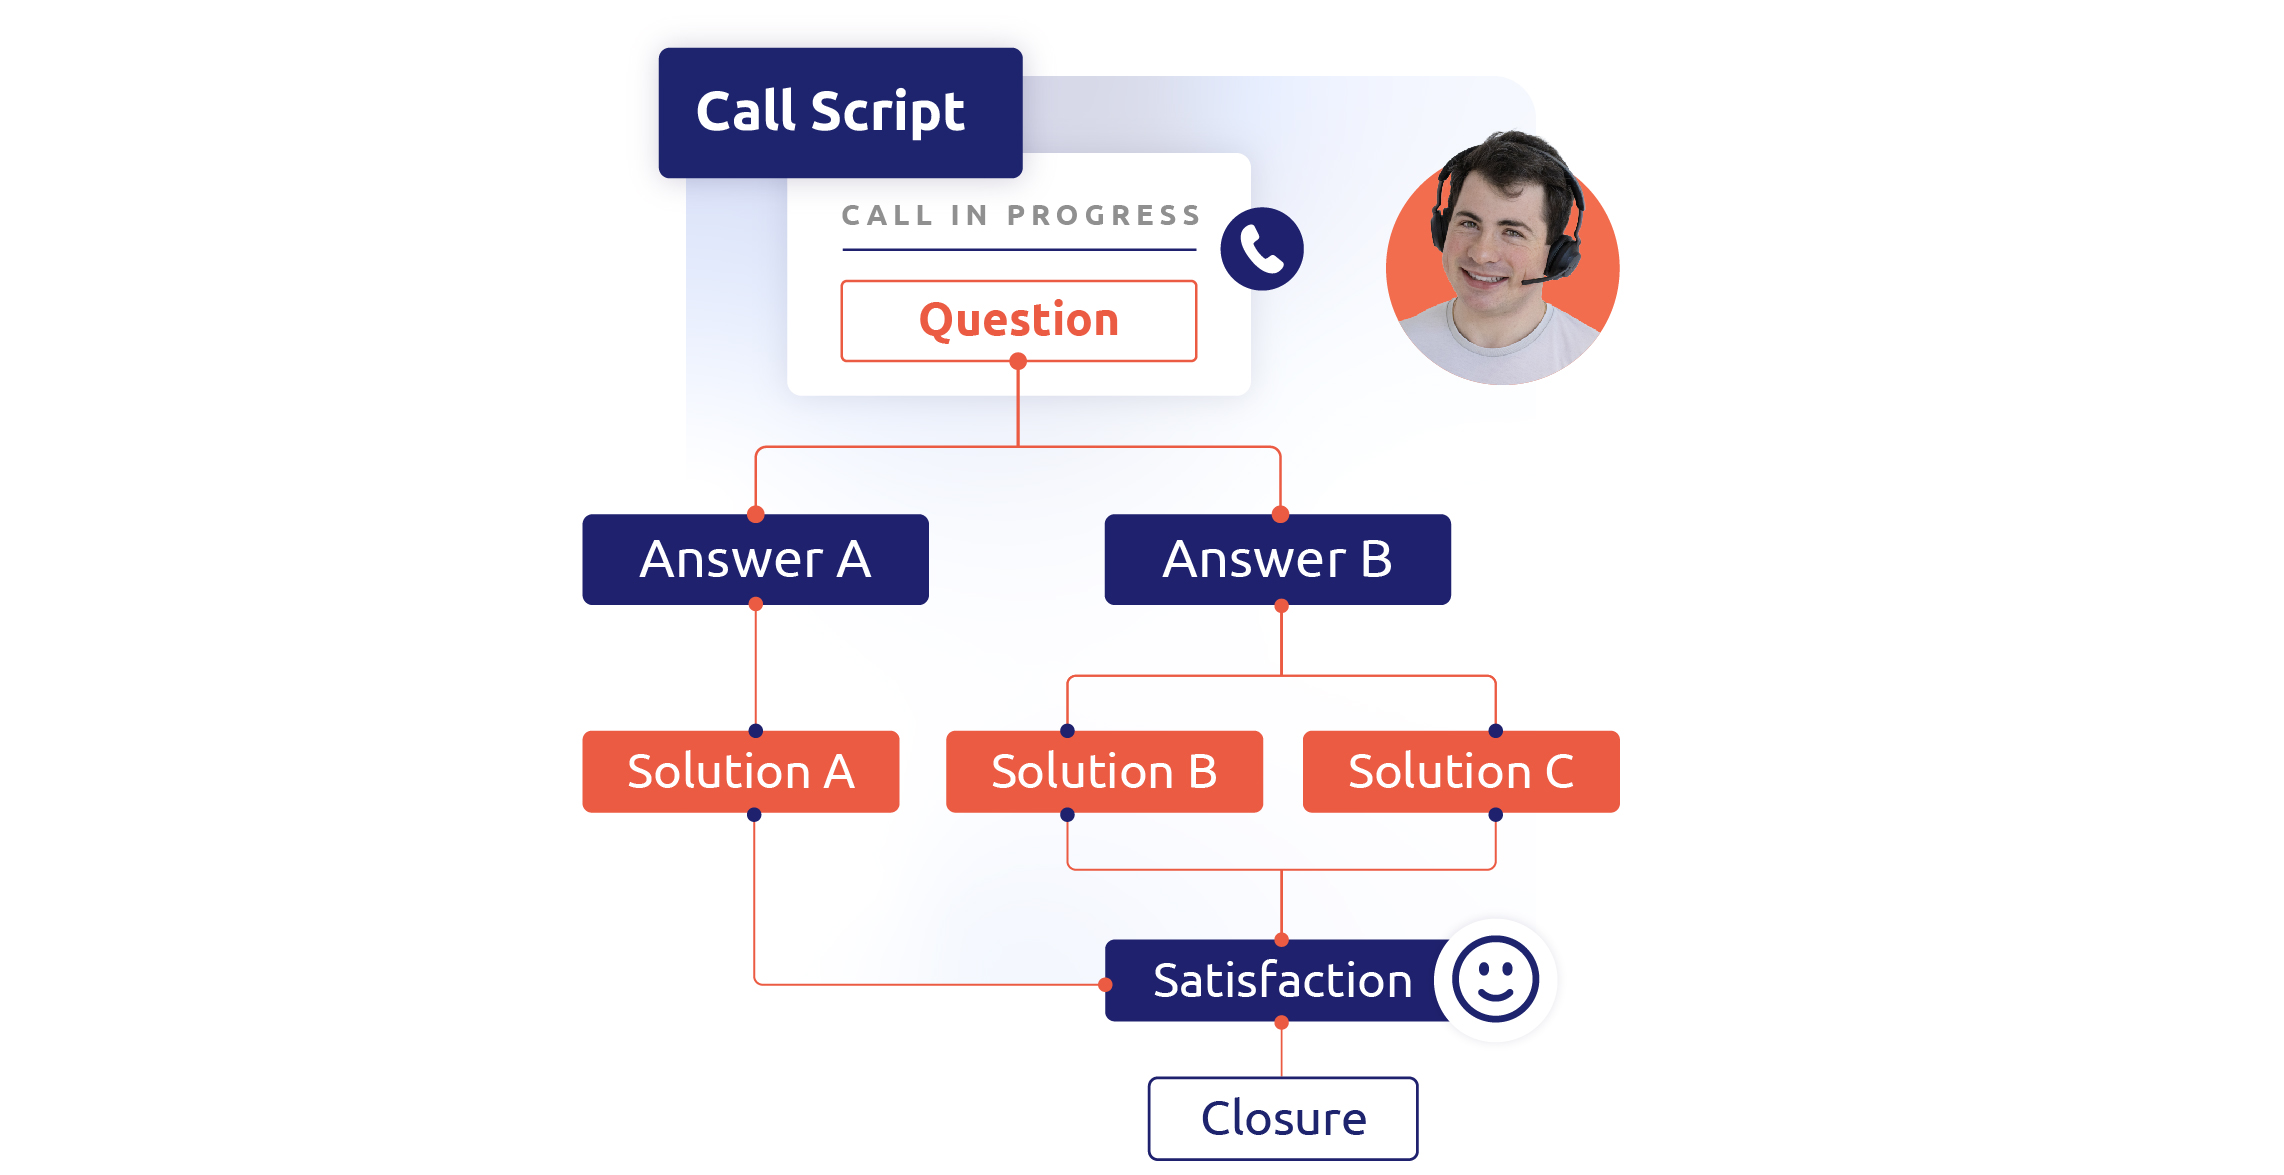 Use call scripts to avoir spam